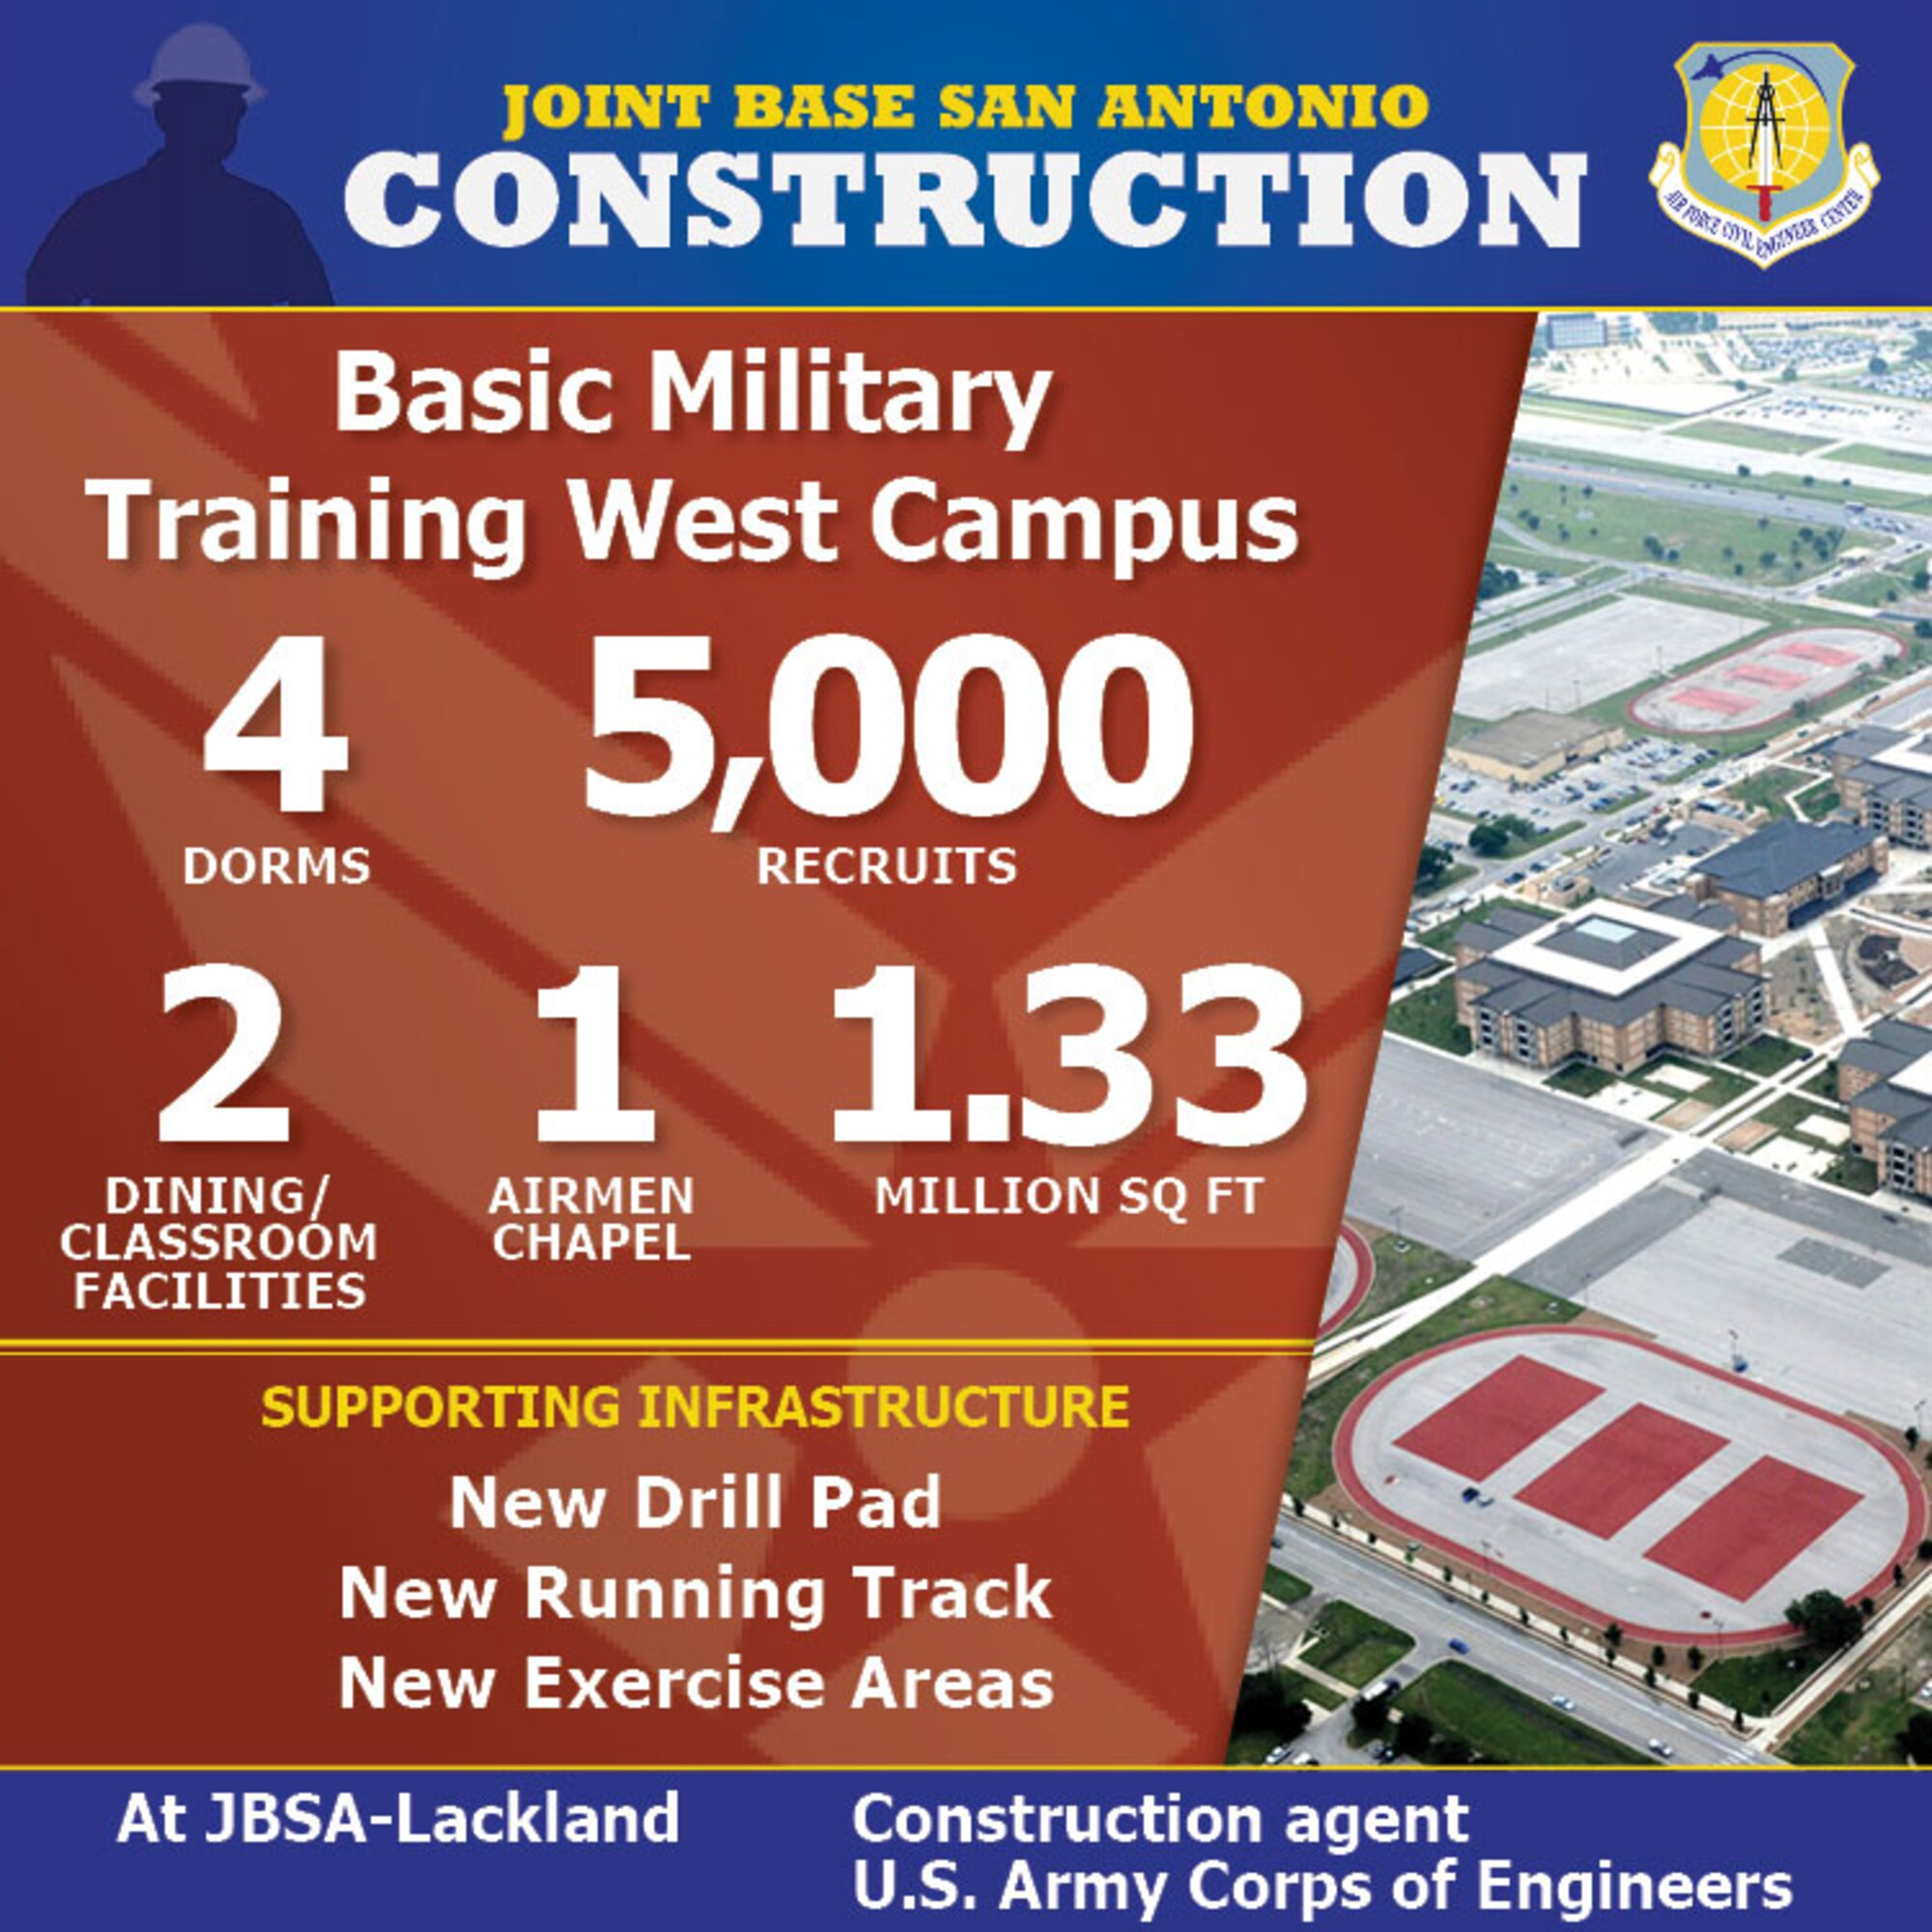 Graphic for construction efforts at JBSA-Lackland.